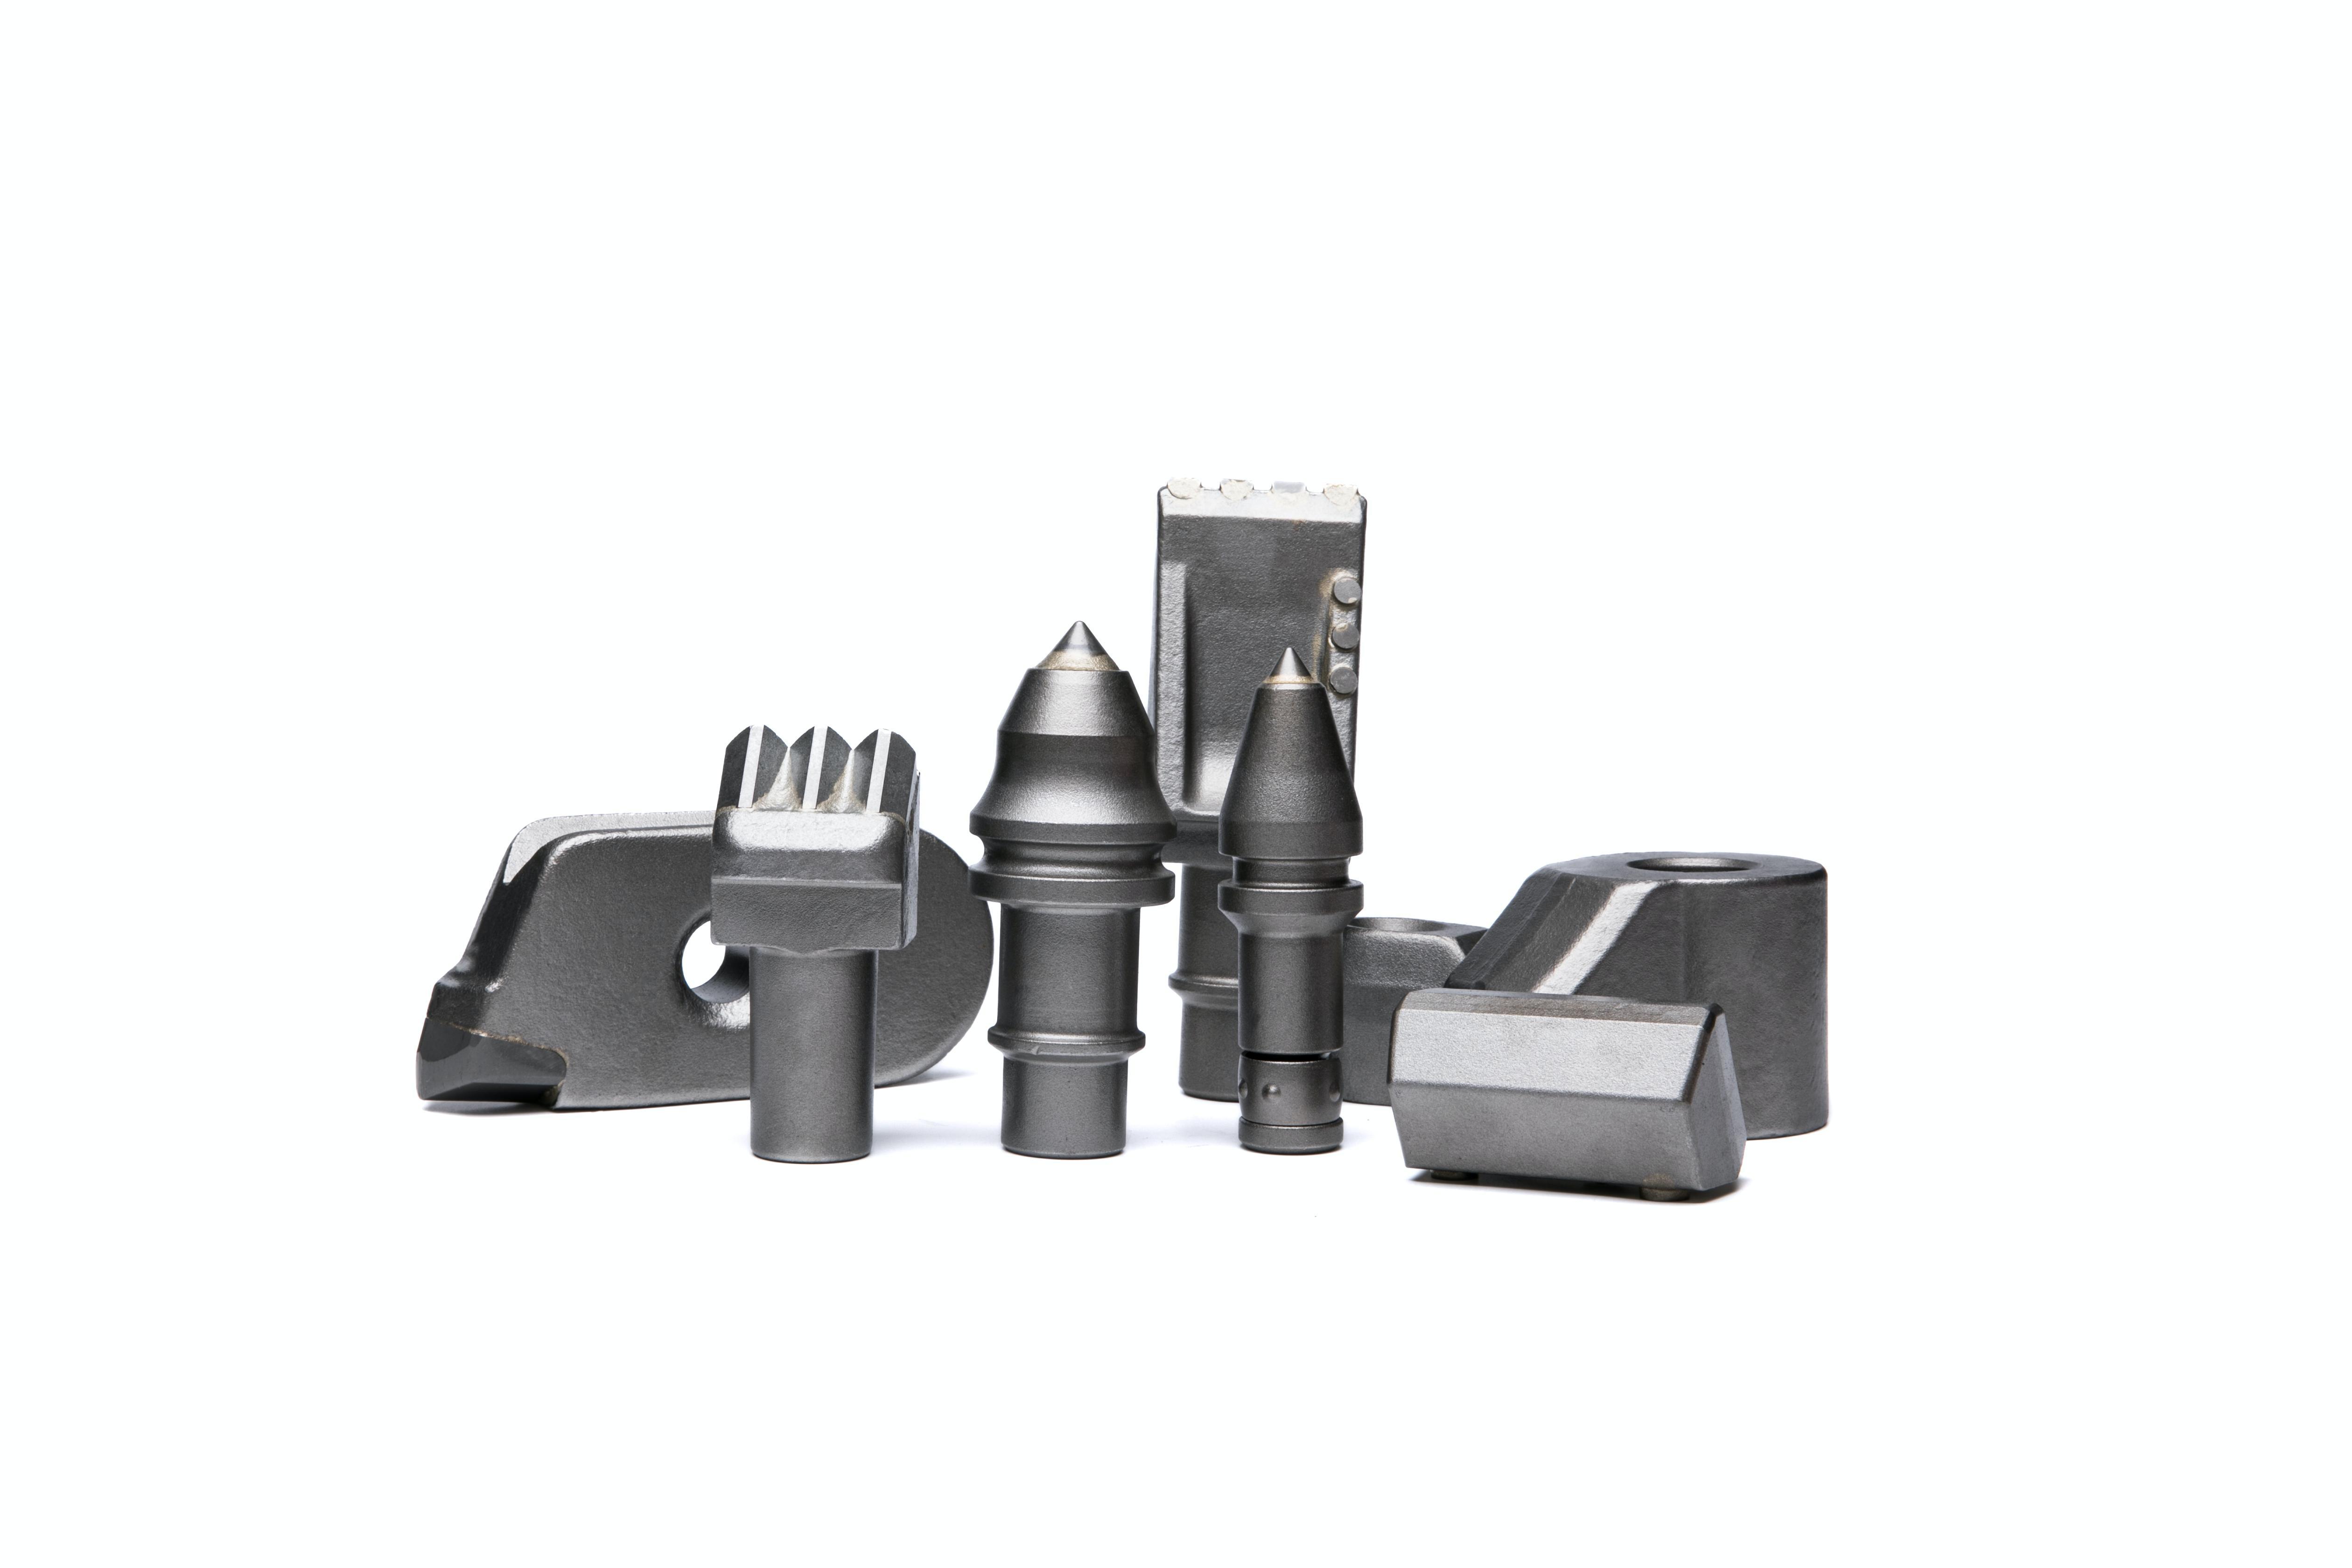 Zhejiang JYF Machinery Co., Ltd. Provides Highly Qualified Cutting Tools And Leading-Edge Wear Parts Offering Outstanding Performance At Factory Price